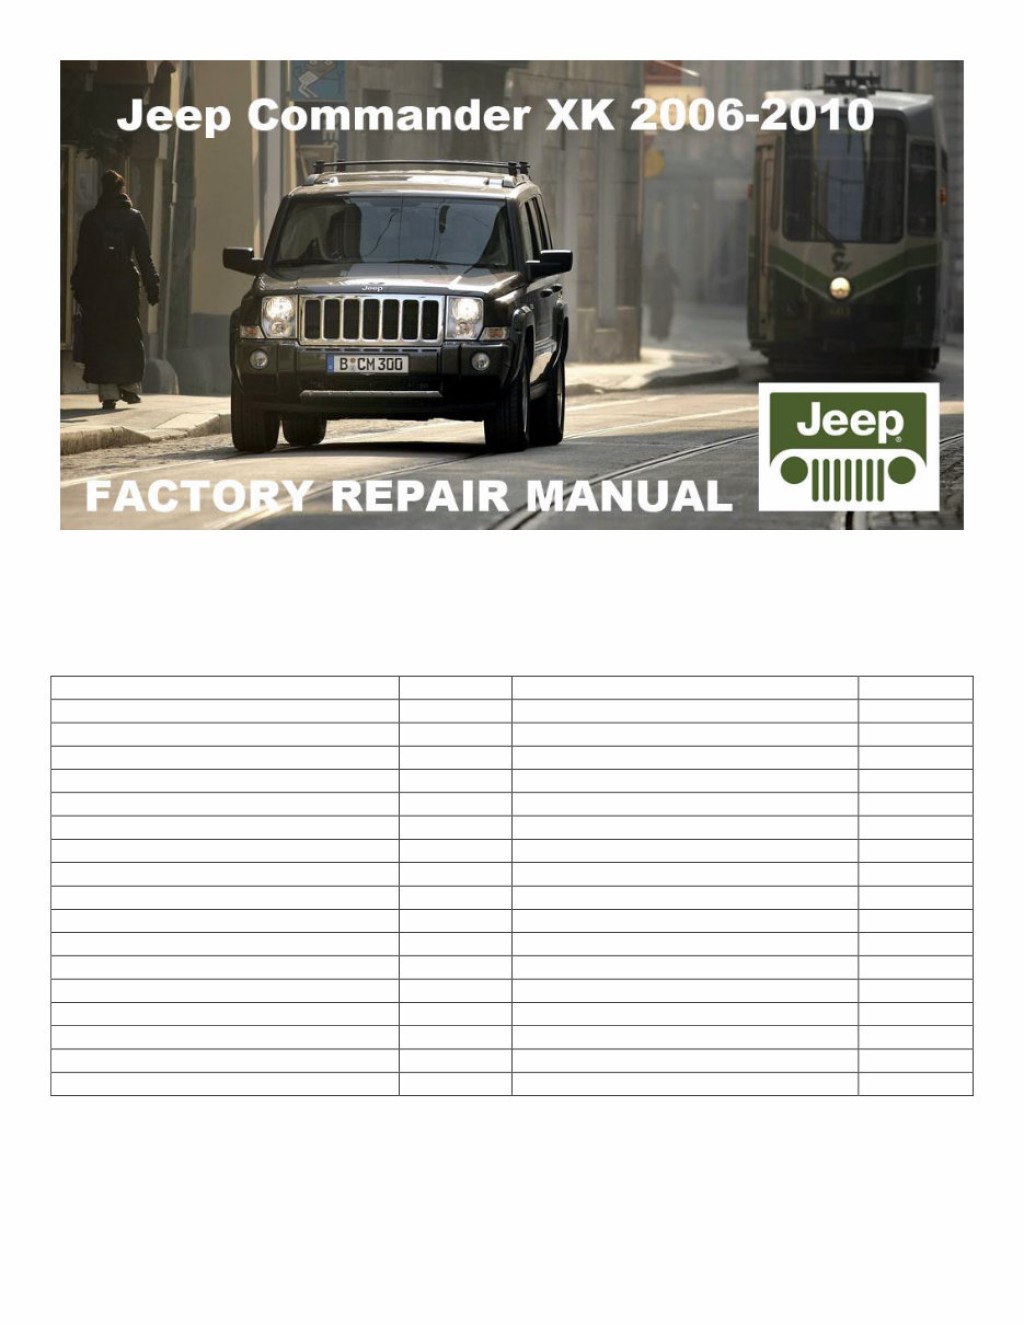 Picture of: Jeep Commander Service & Repair Manual Software